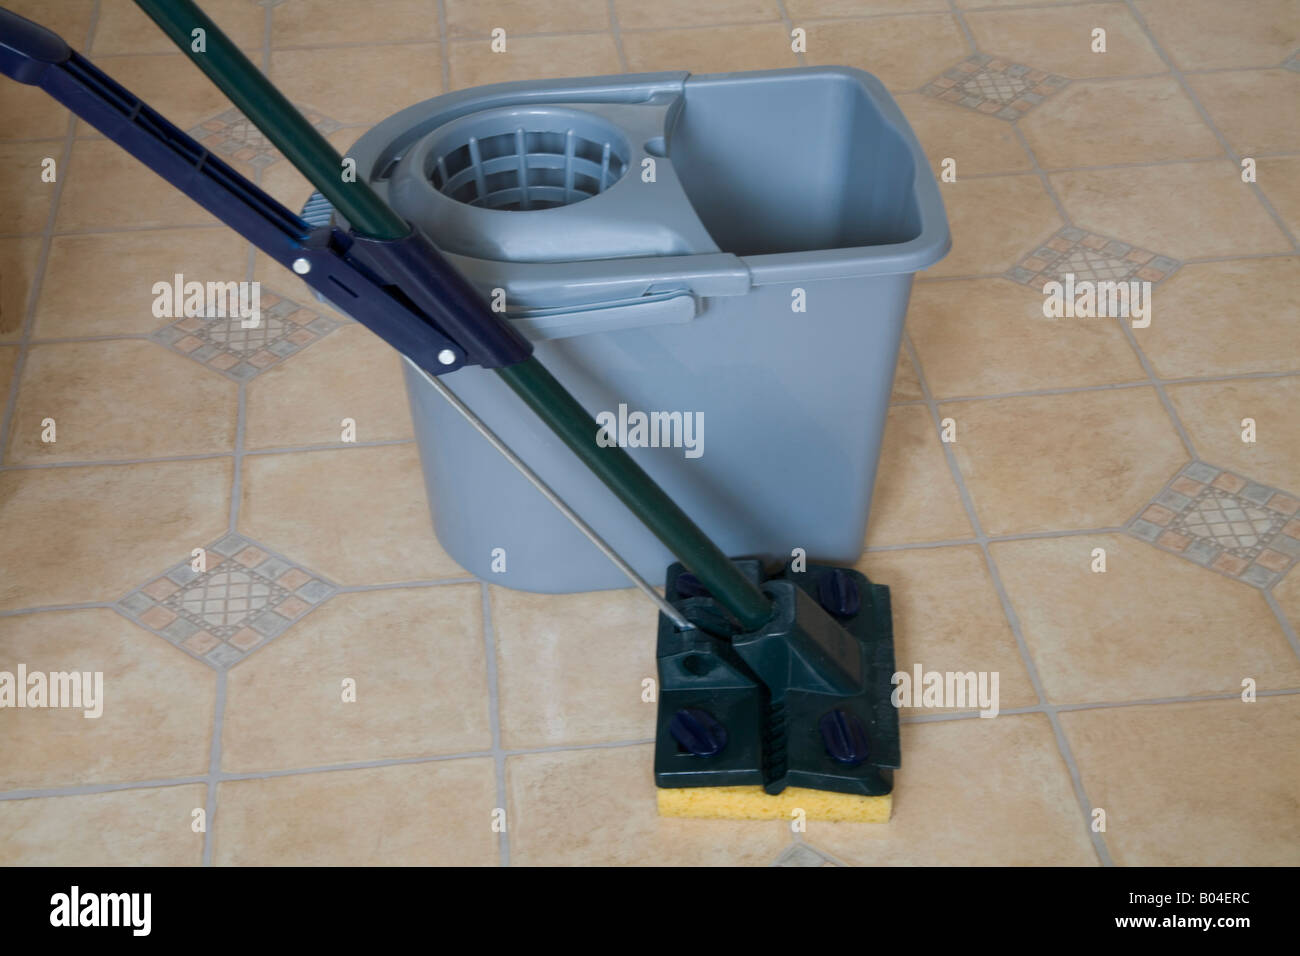 Still Life Studio Close up A sponge squeegee mop and grey bucket for cleaning a kitchen floor Stock Photo